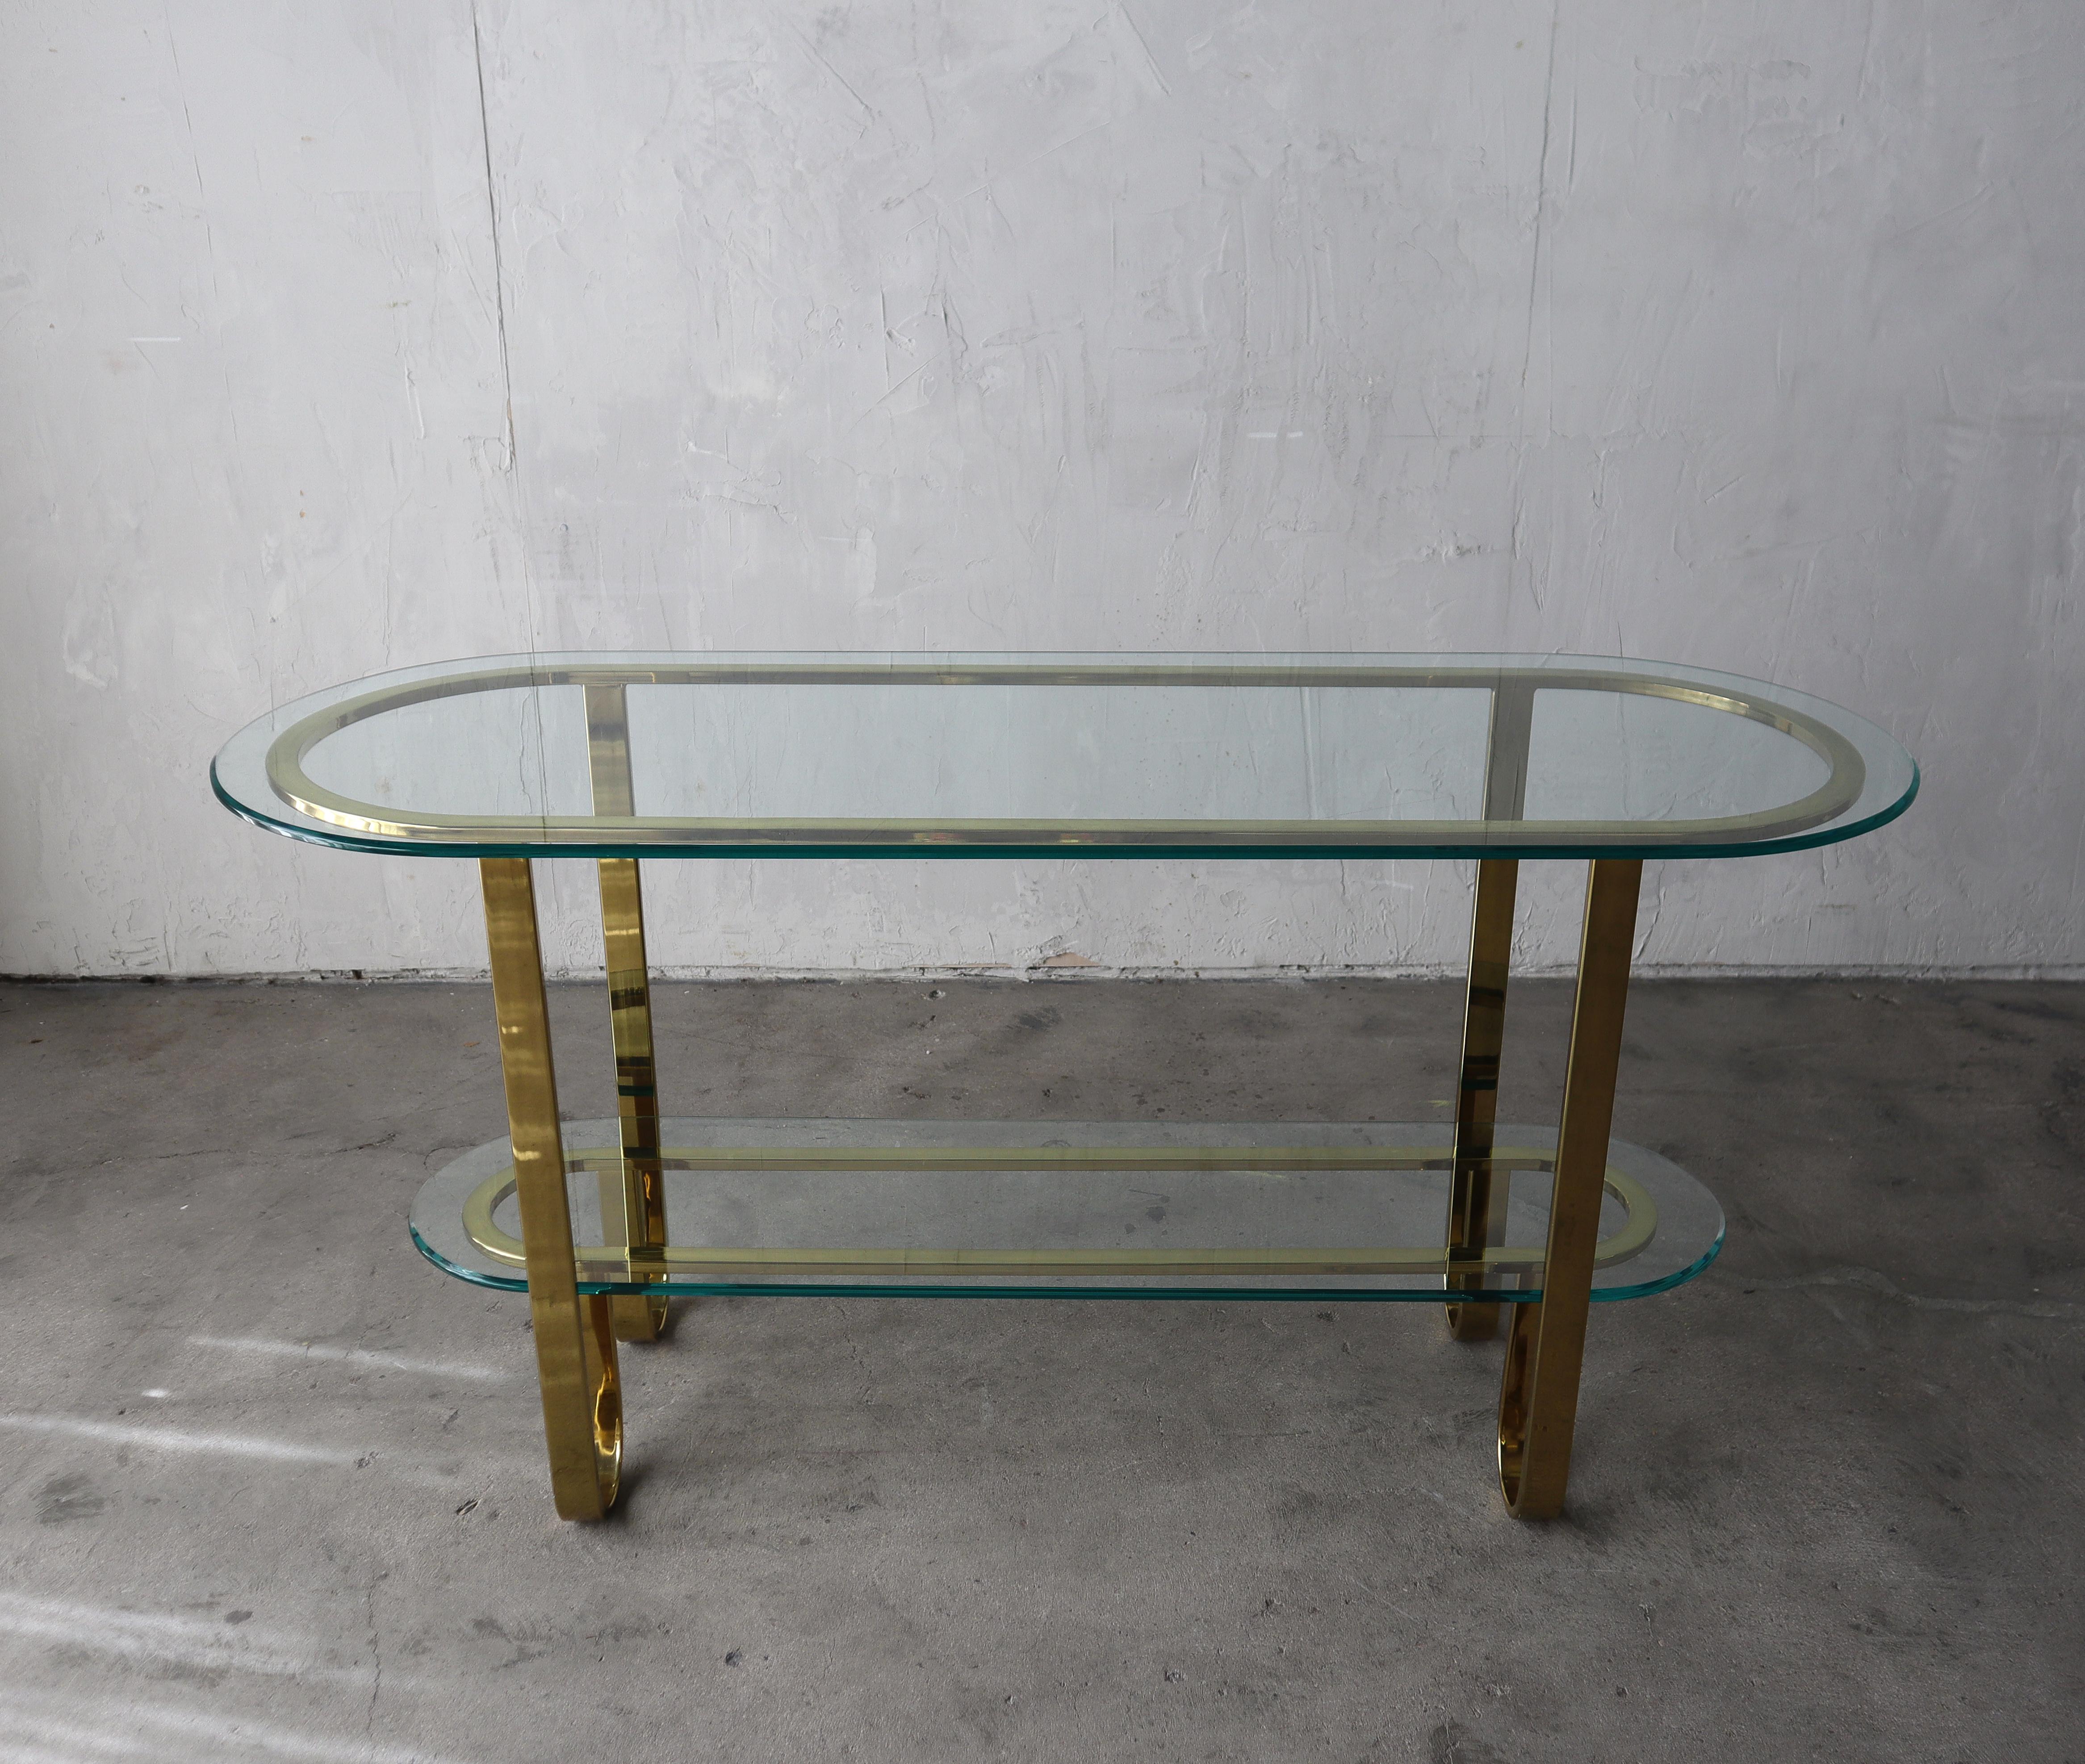 1980's Brass and Glass Racetrack Console Table Bar In Good Condition For Sale In Las Vegas, NV